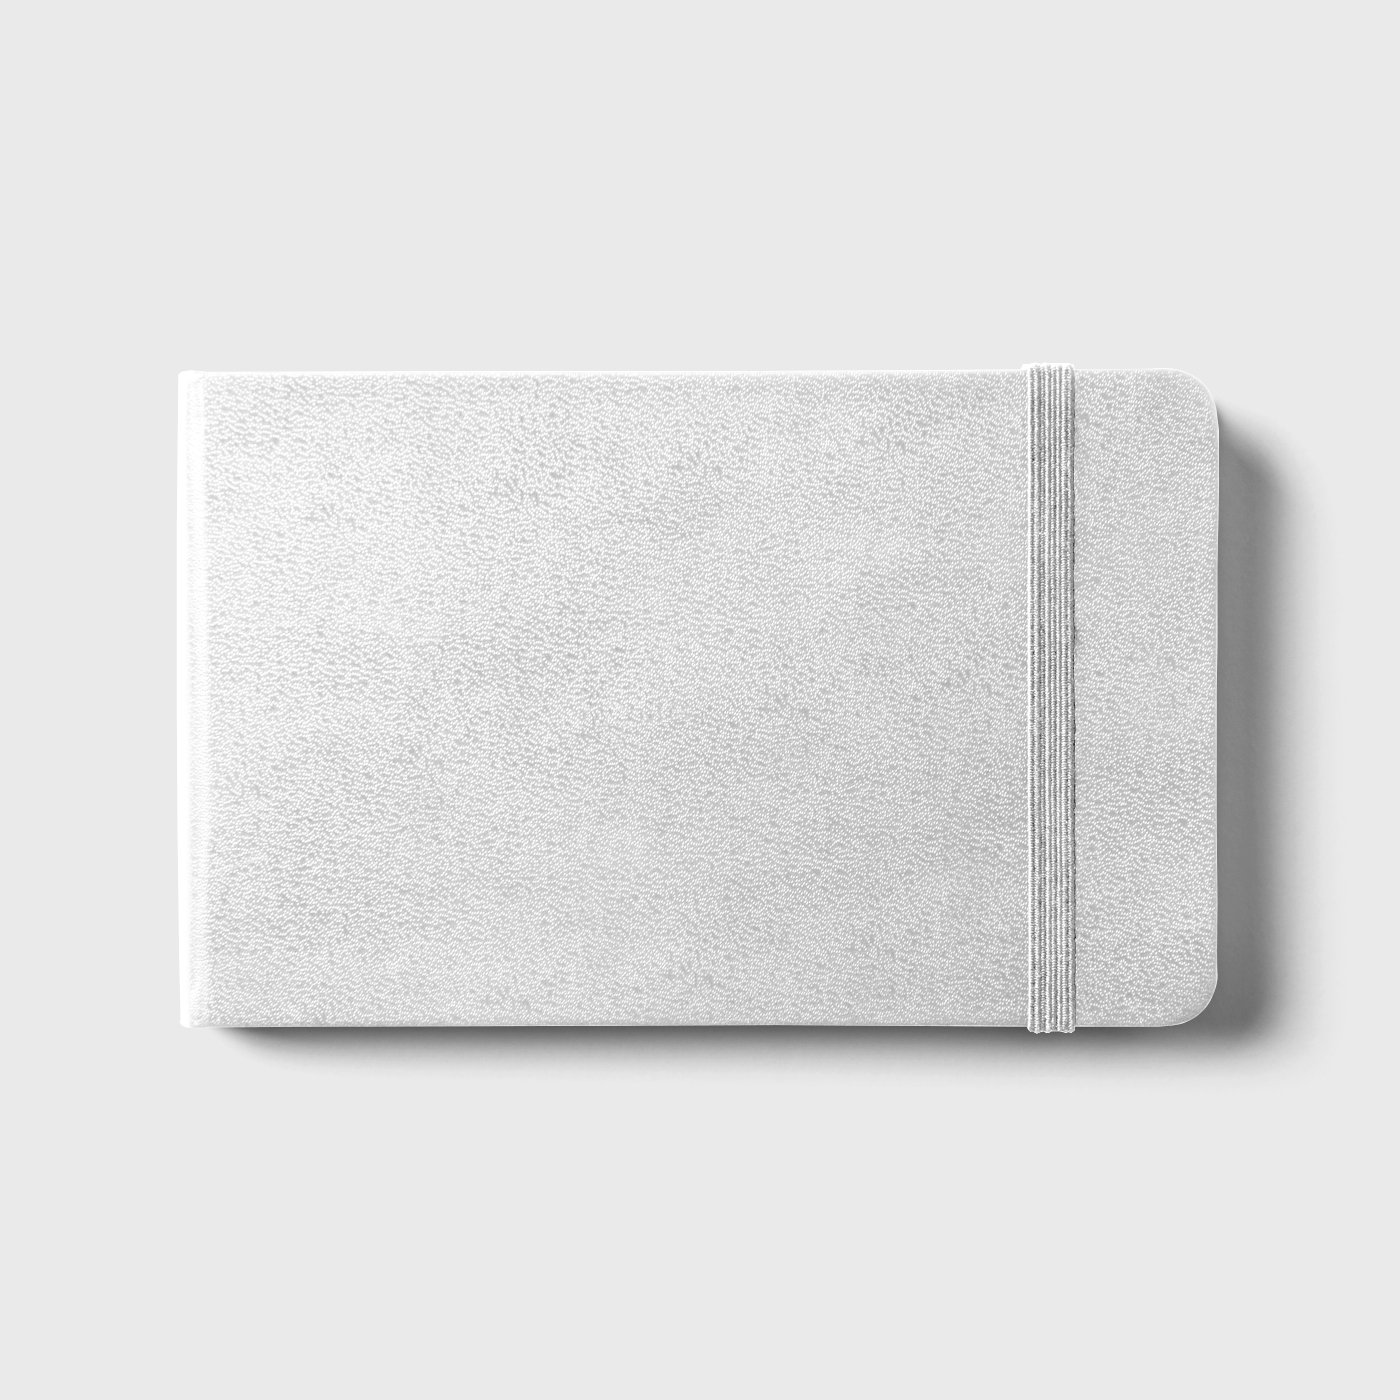 Top View of Rubber Band Clad Notebook Mockup FREE PSD